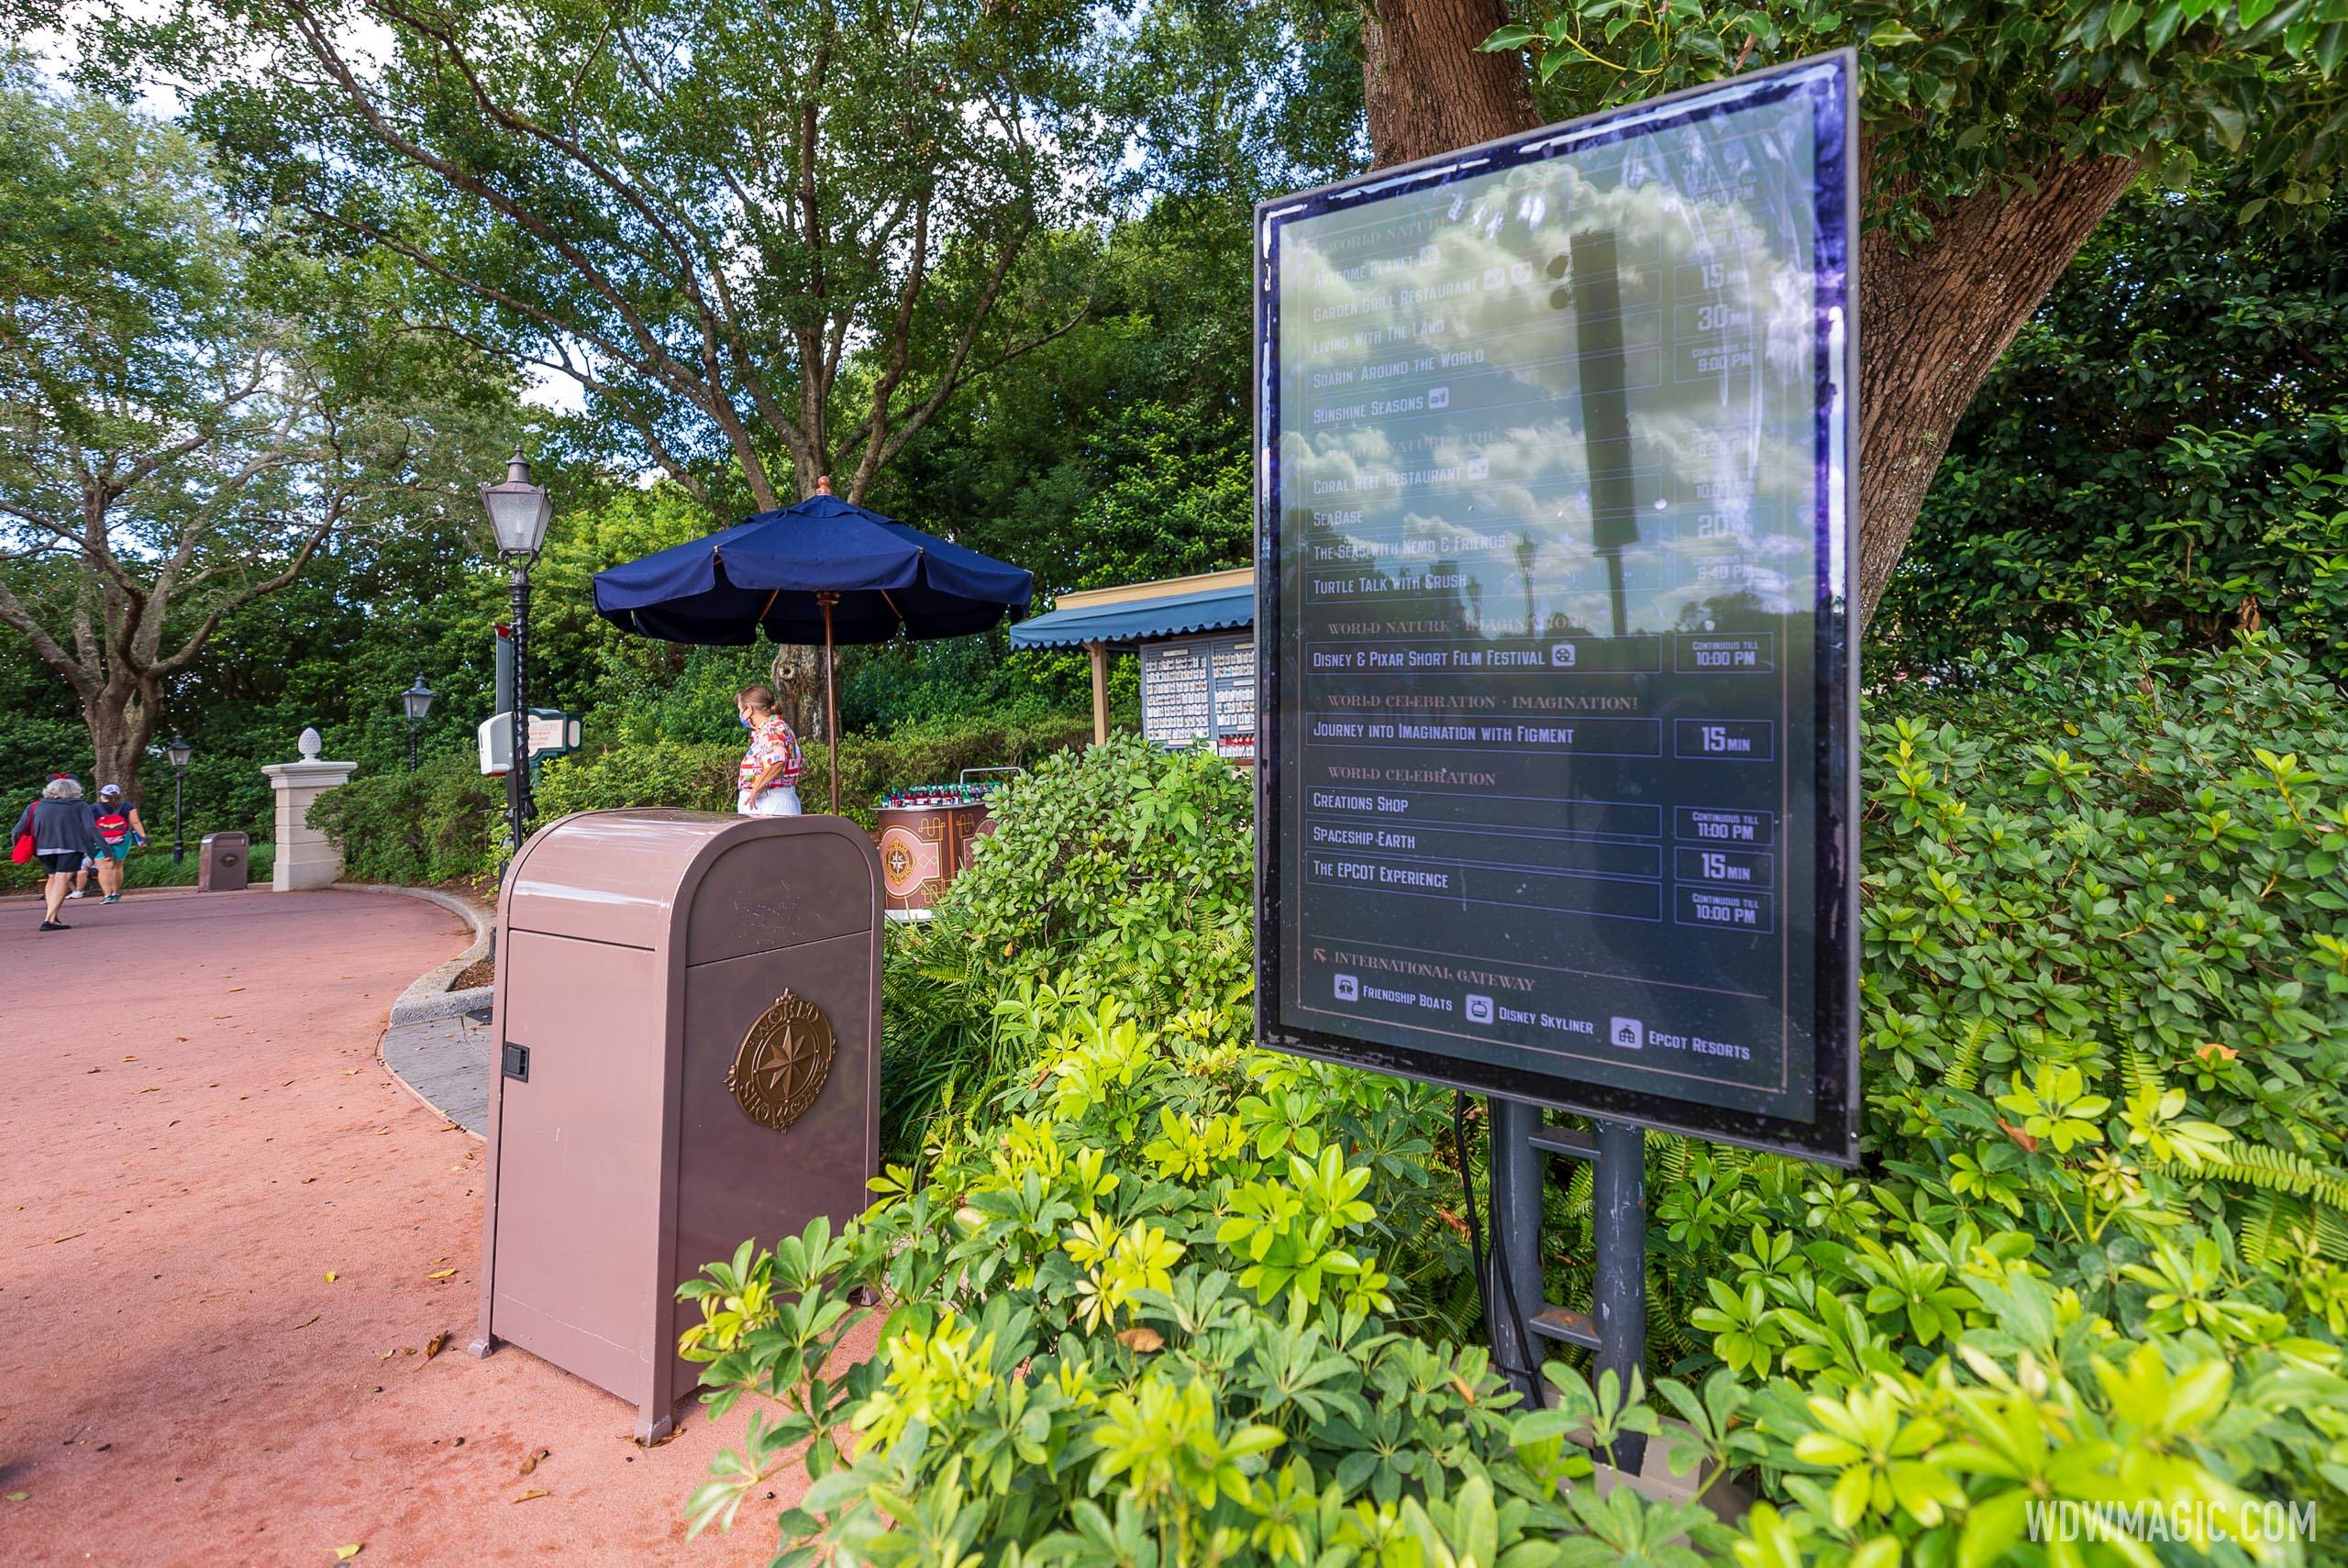 Digital tip boards come to EPCOT